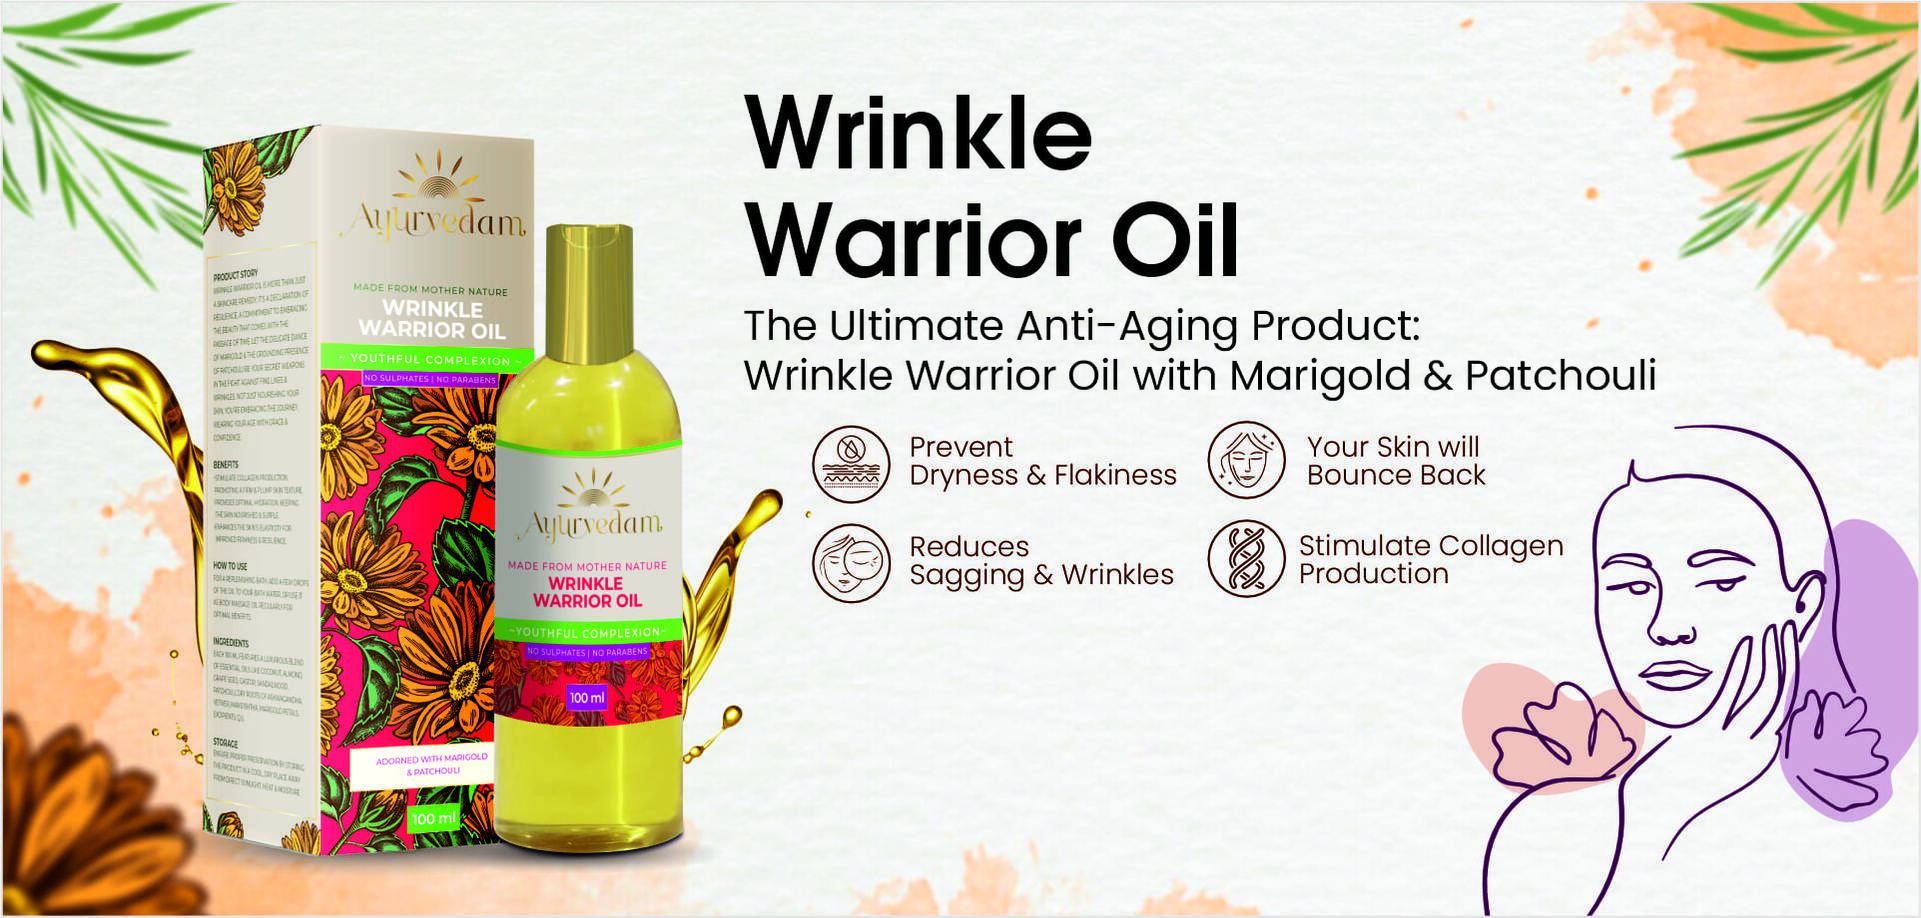 Ayurvedam Wrinkle Warrior Oil Banner with it's benefits Listed